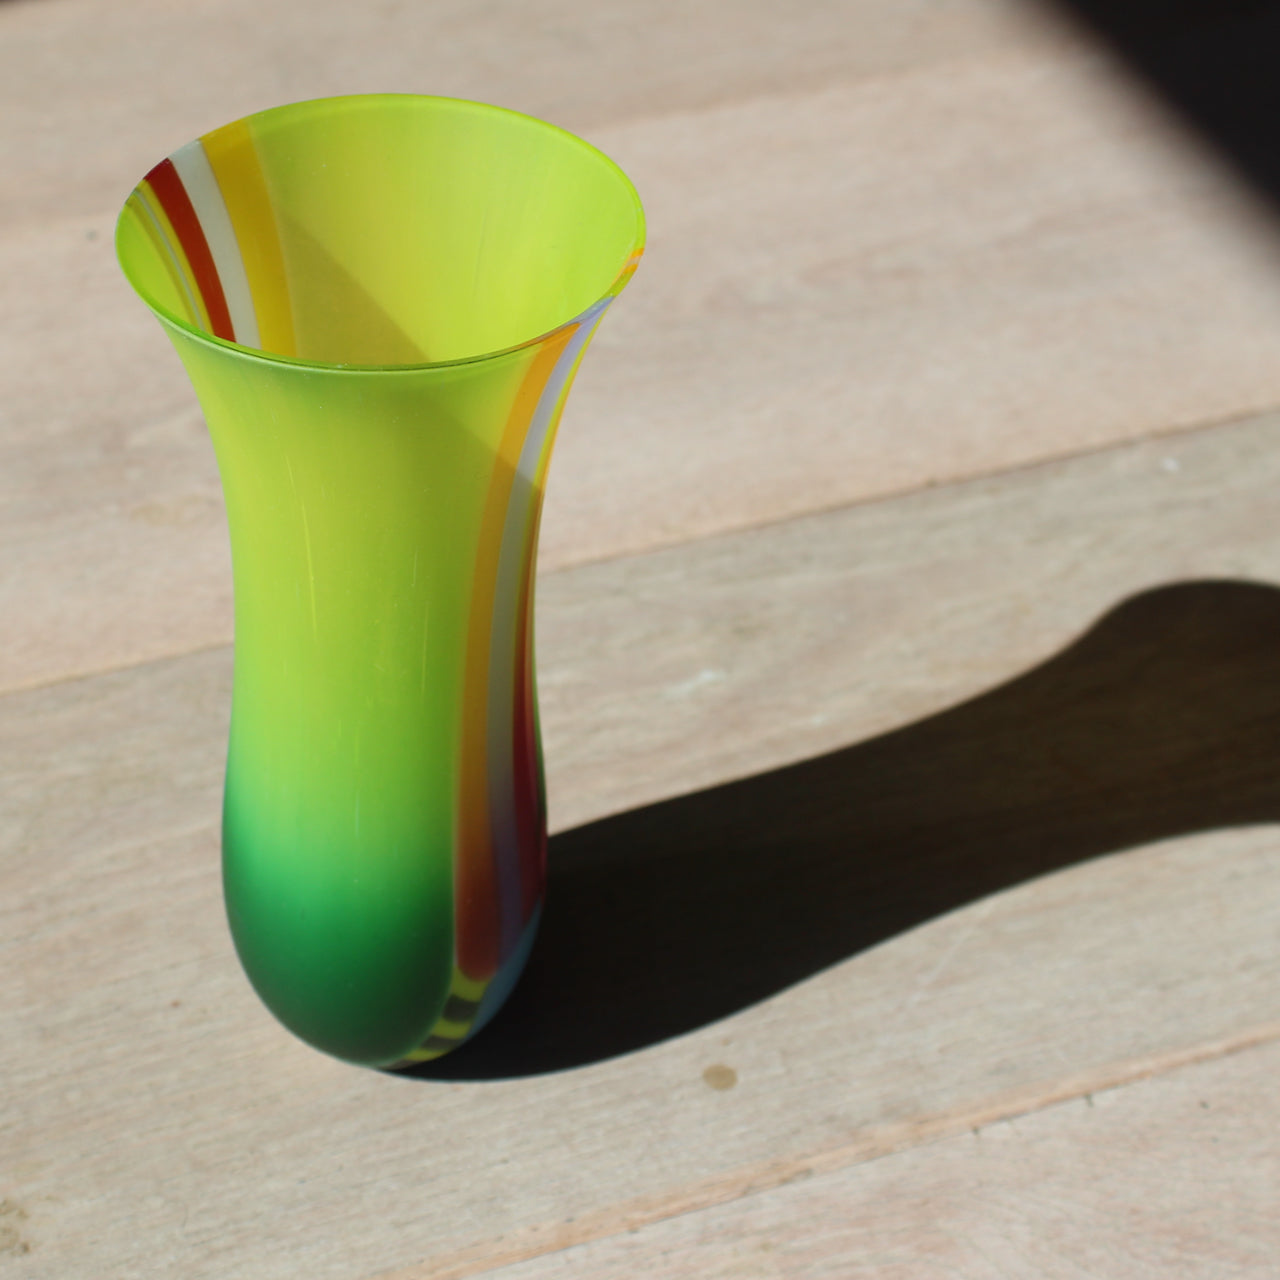 Narrow vibrant coloured glass vase in tones of green, yellow, blue and orange by glass artist Ruth Shelley